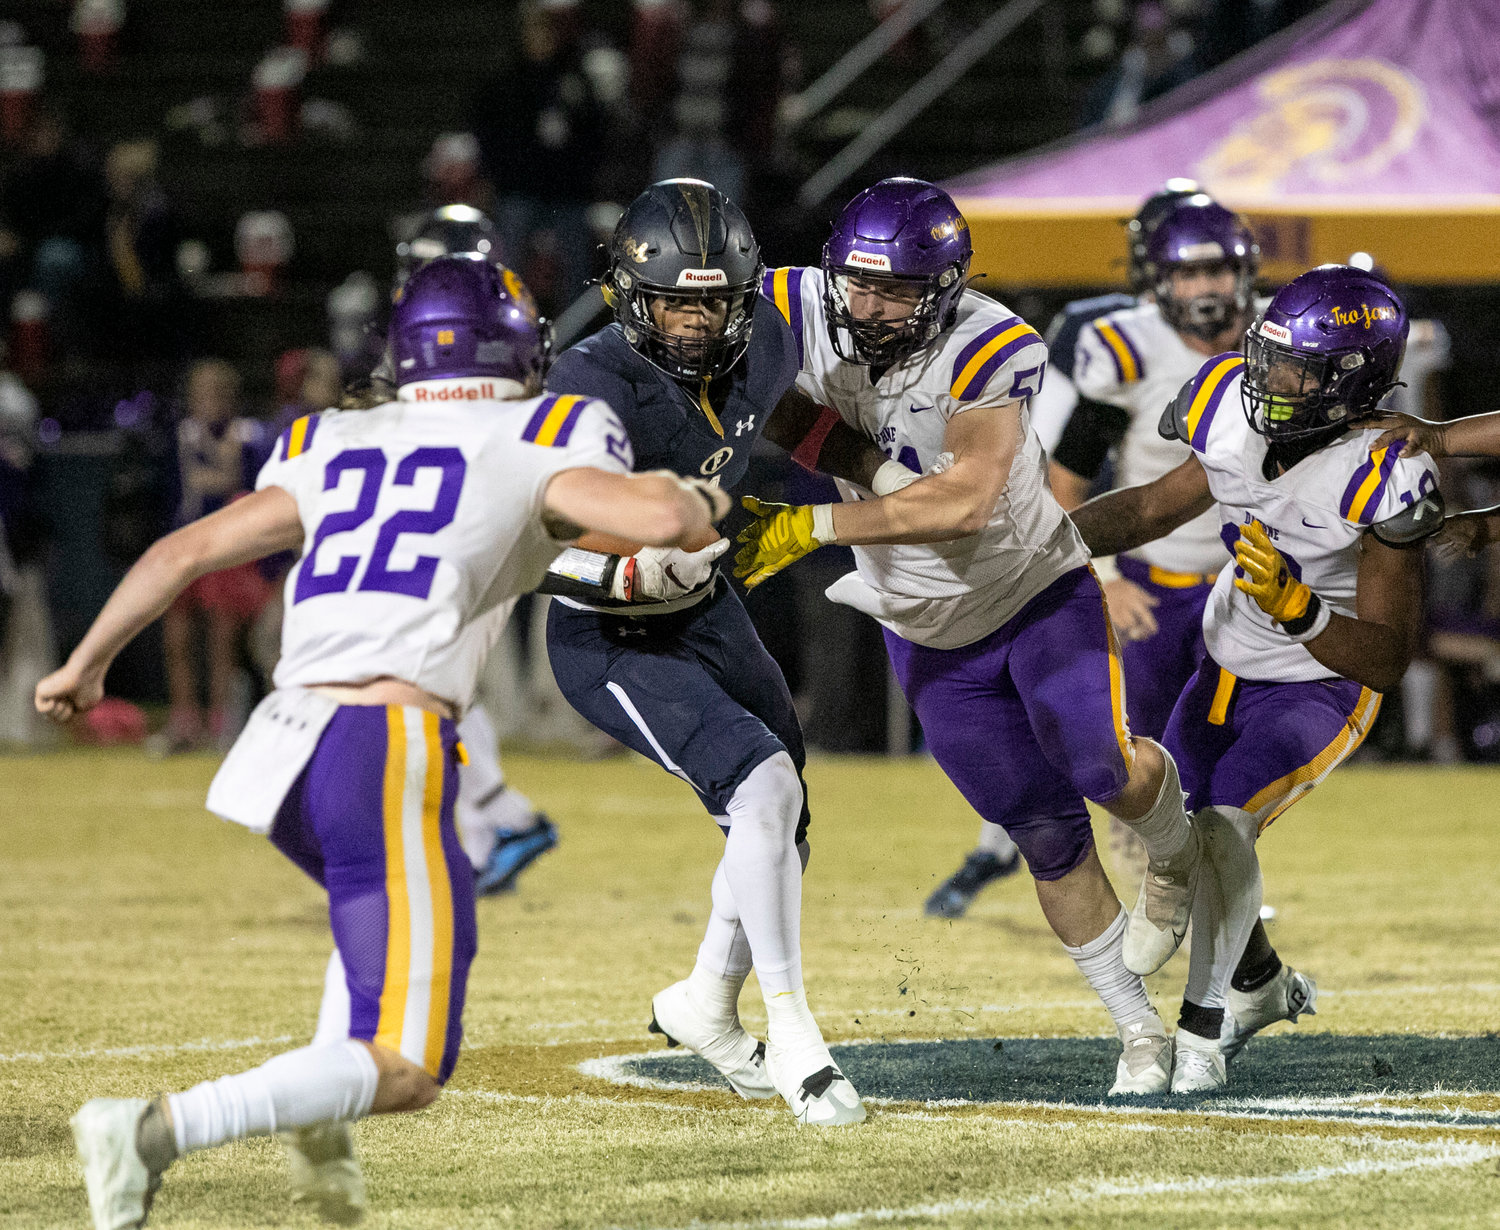 Foley junior Perry Thompson fights off Daphne tacklers during the Class 7A Region 1 contest between the Lions and Trojans at Ivan Jones Stadium Oct. 21. Thompson was chosen as a first-team all-state selection after Foley won its first region title since 2007.